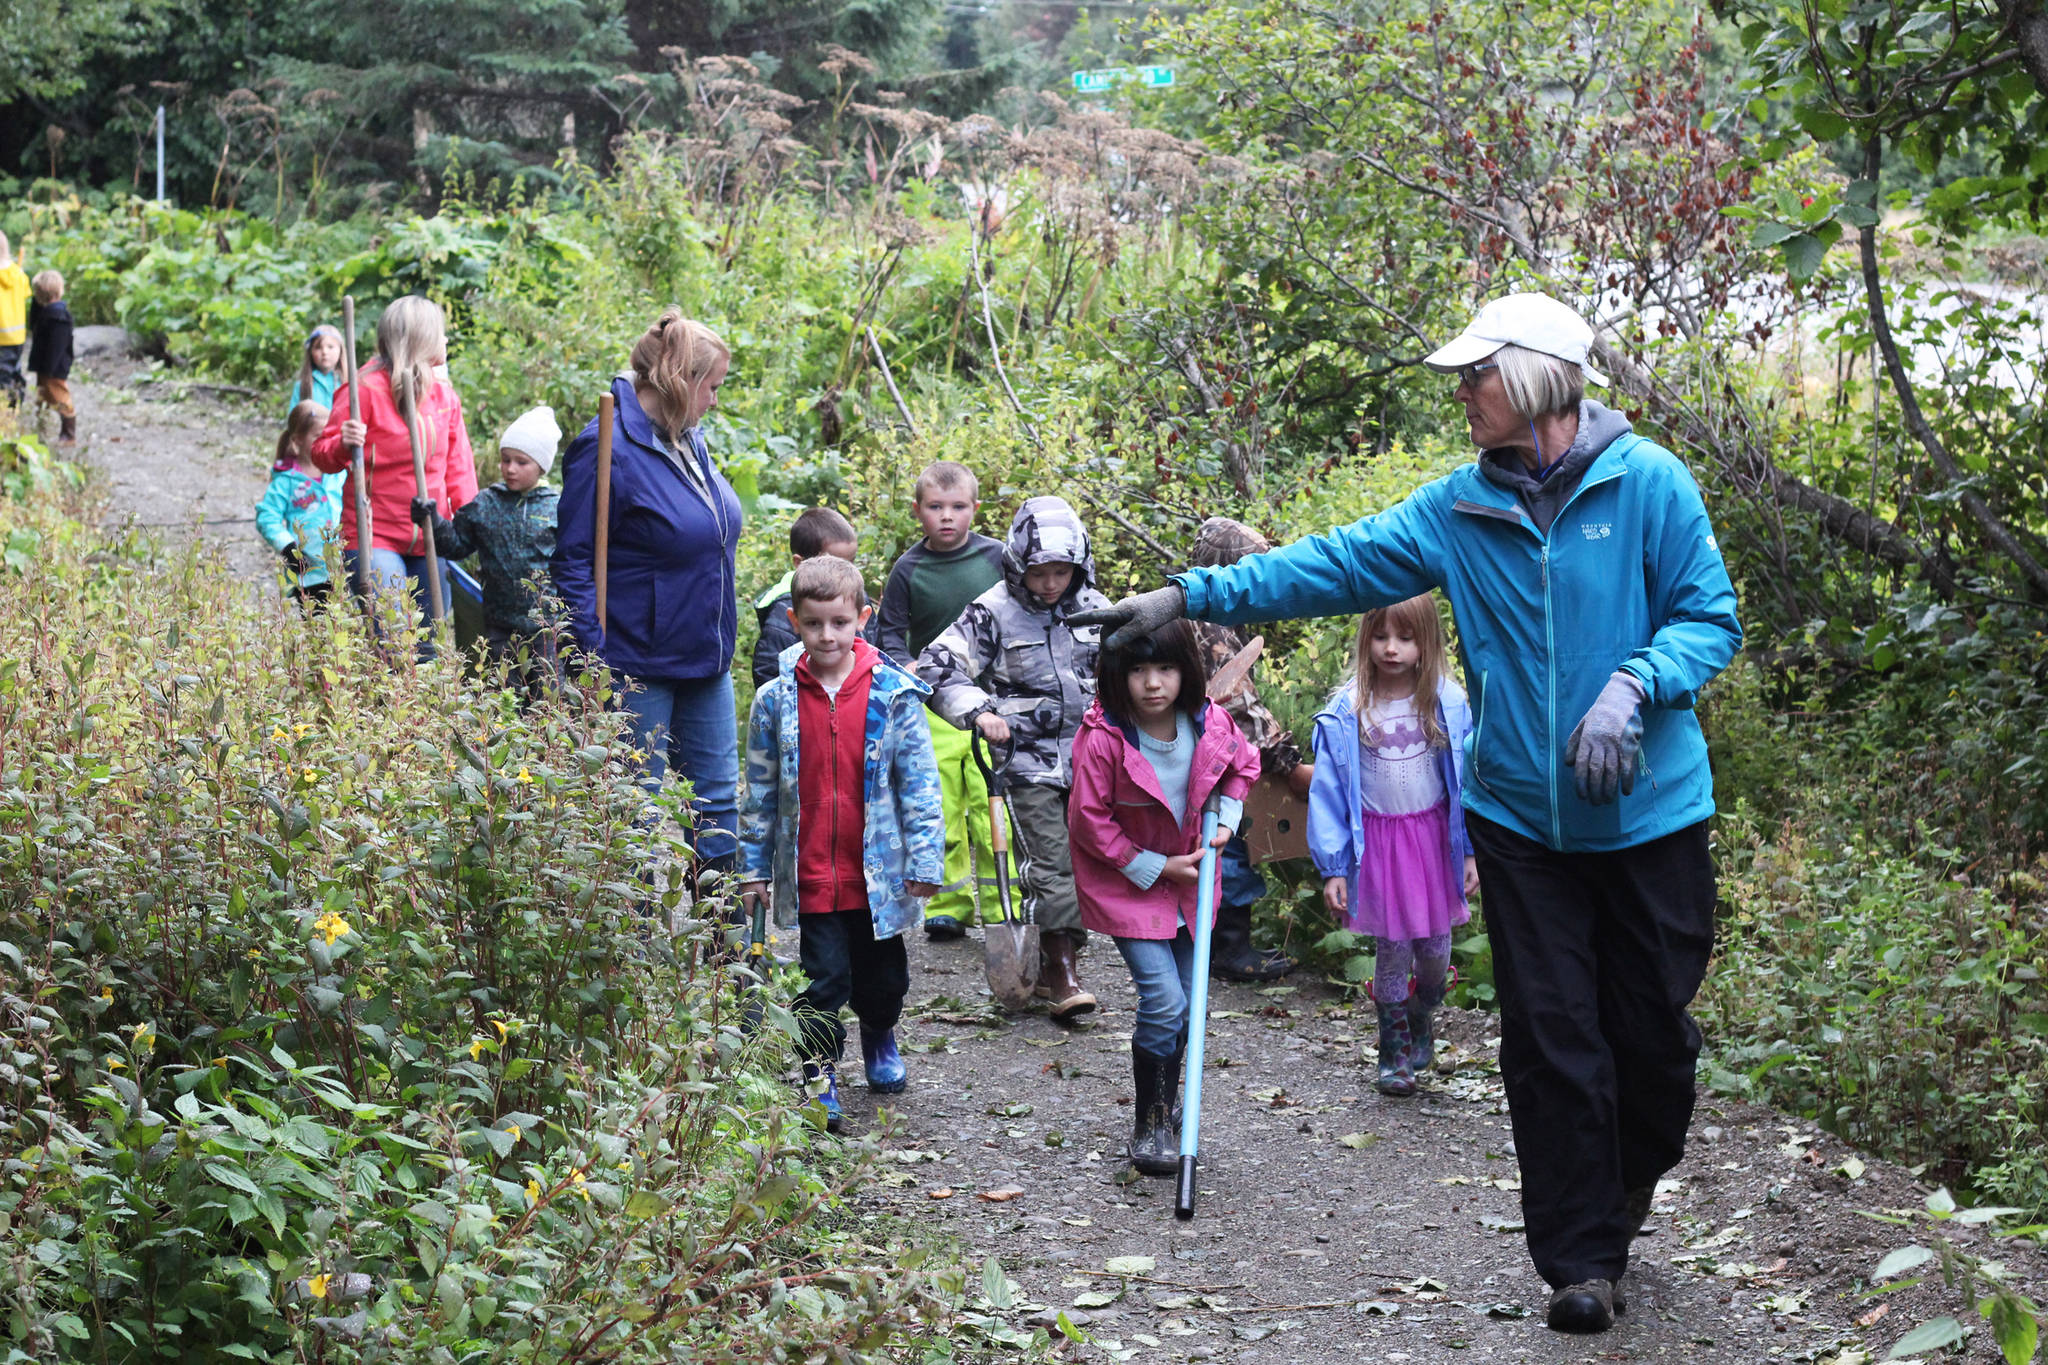 Deb Lowney leads a group of Paul Banks Elementary students along a recently-completed trail at Karen Hornaday Park on Thursday, Sept. 7, 2017 in Homer, Alaska. The kids volunteered to transplant pine trees from a nearby street to the trails to help diversify the plant life in the park. (Photo by Megan Pacer/Homer News)